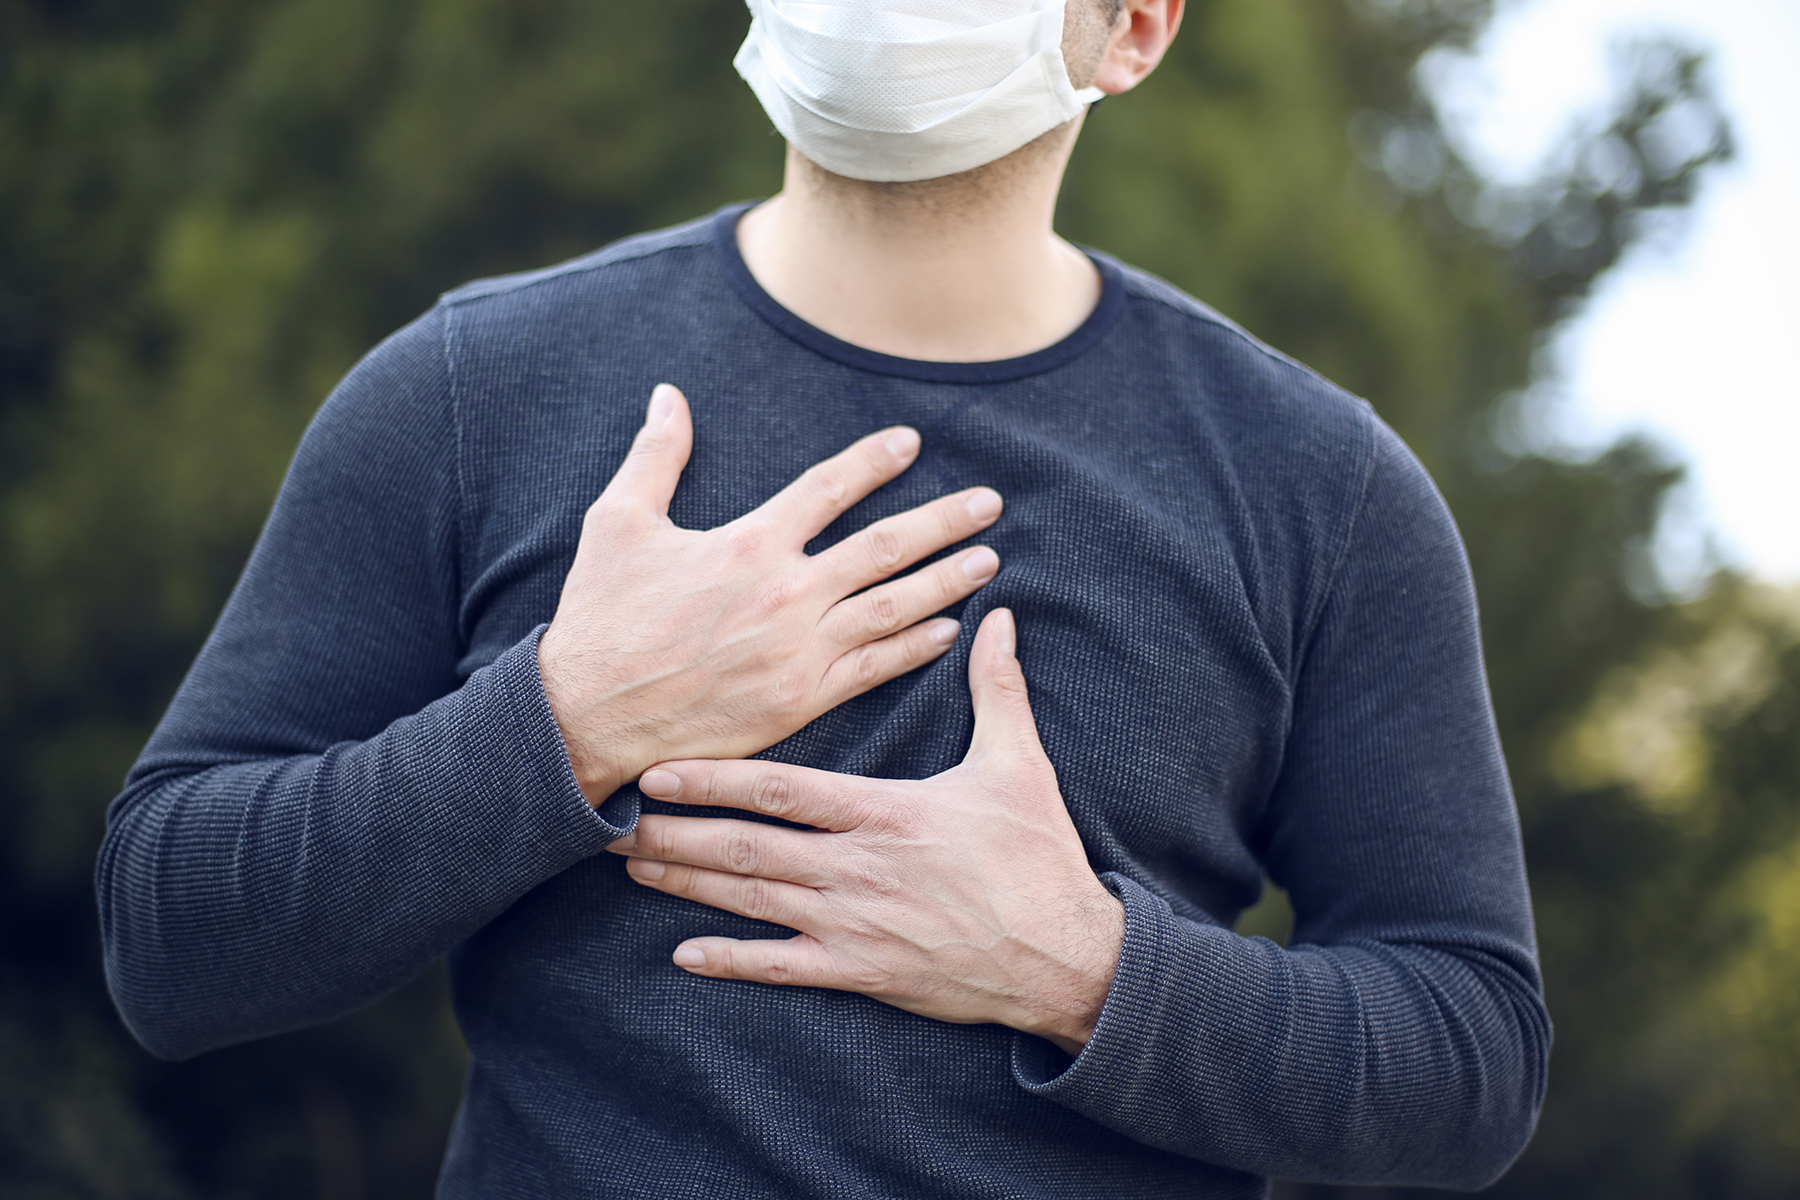 Man with chest pain, COVID mask